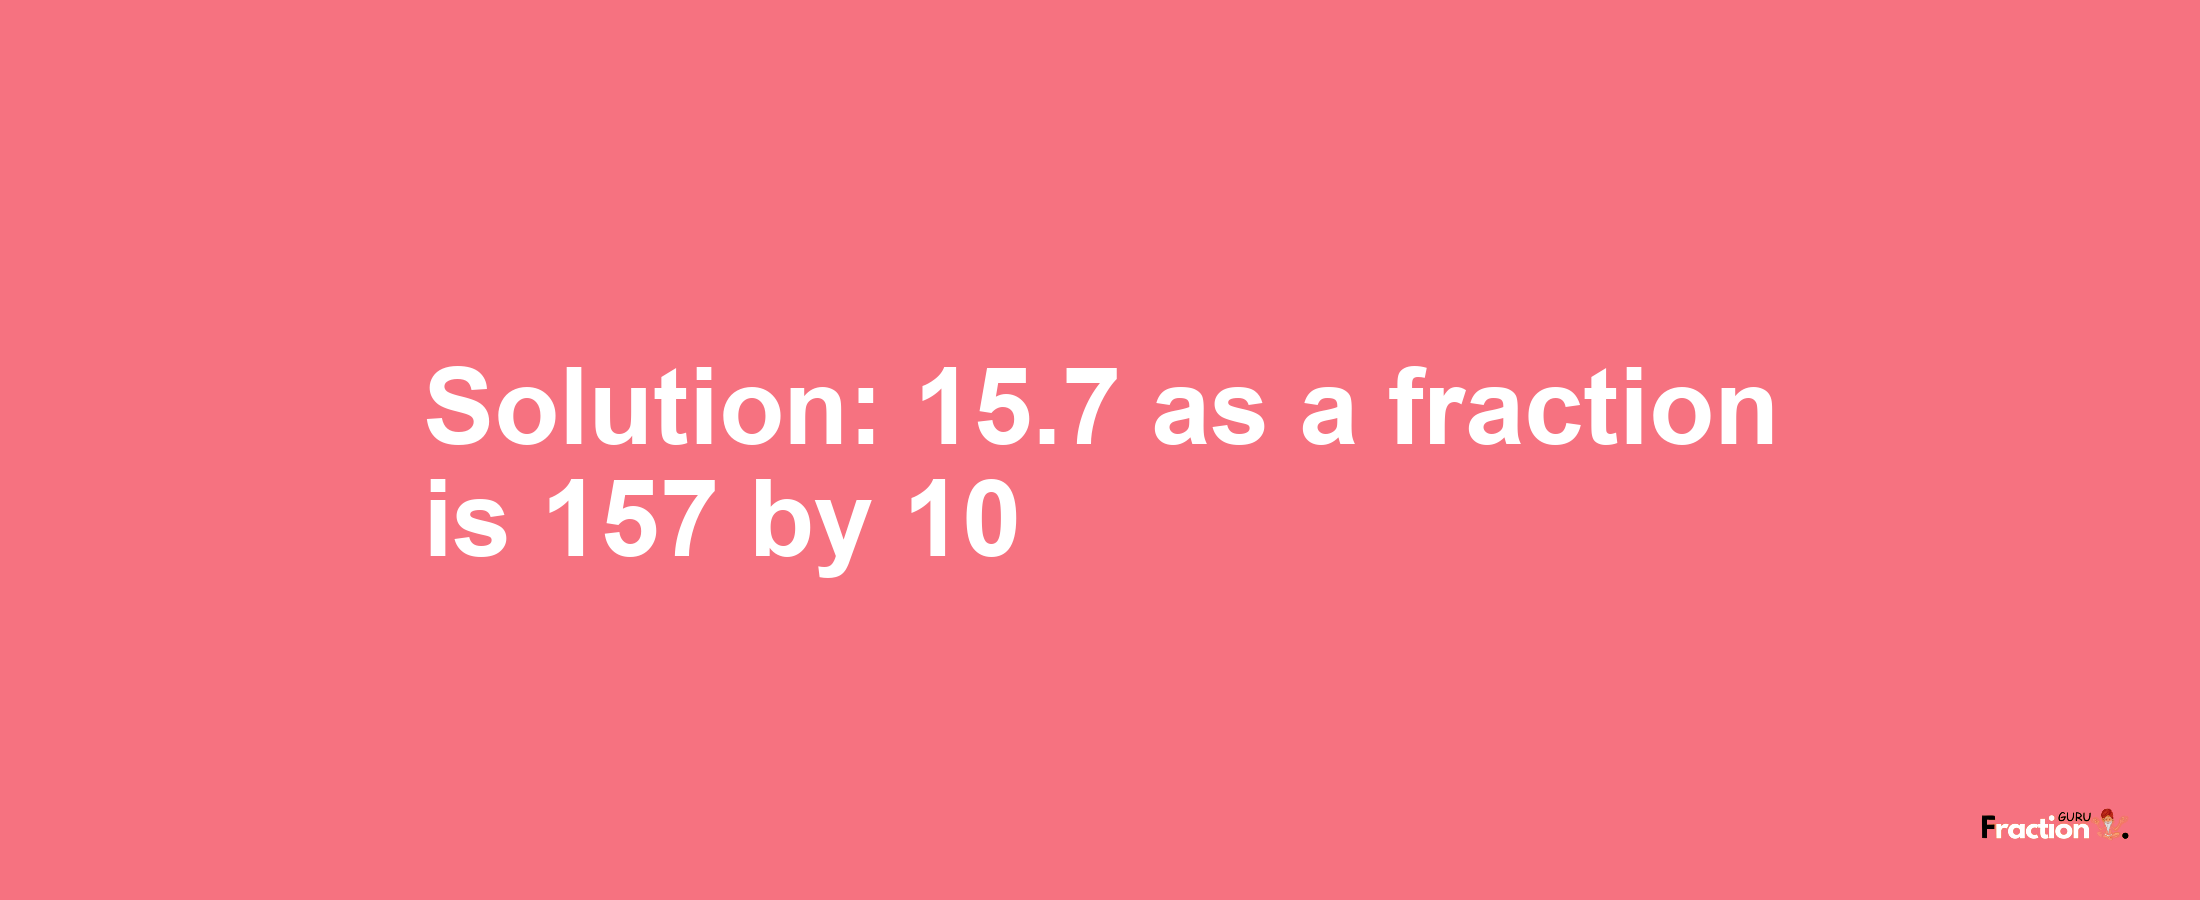 Solution:15.7 as a fraction is 157/10